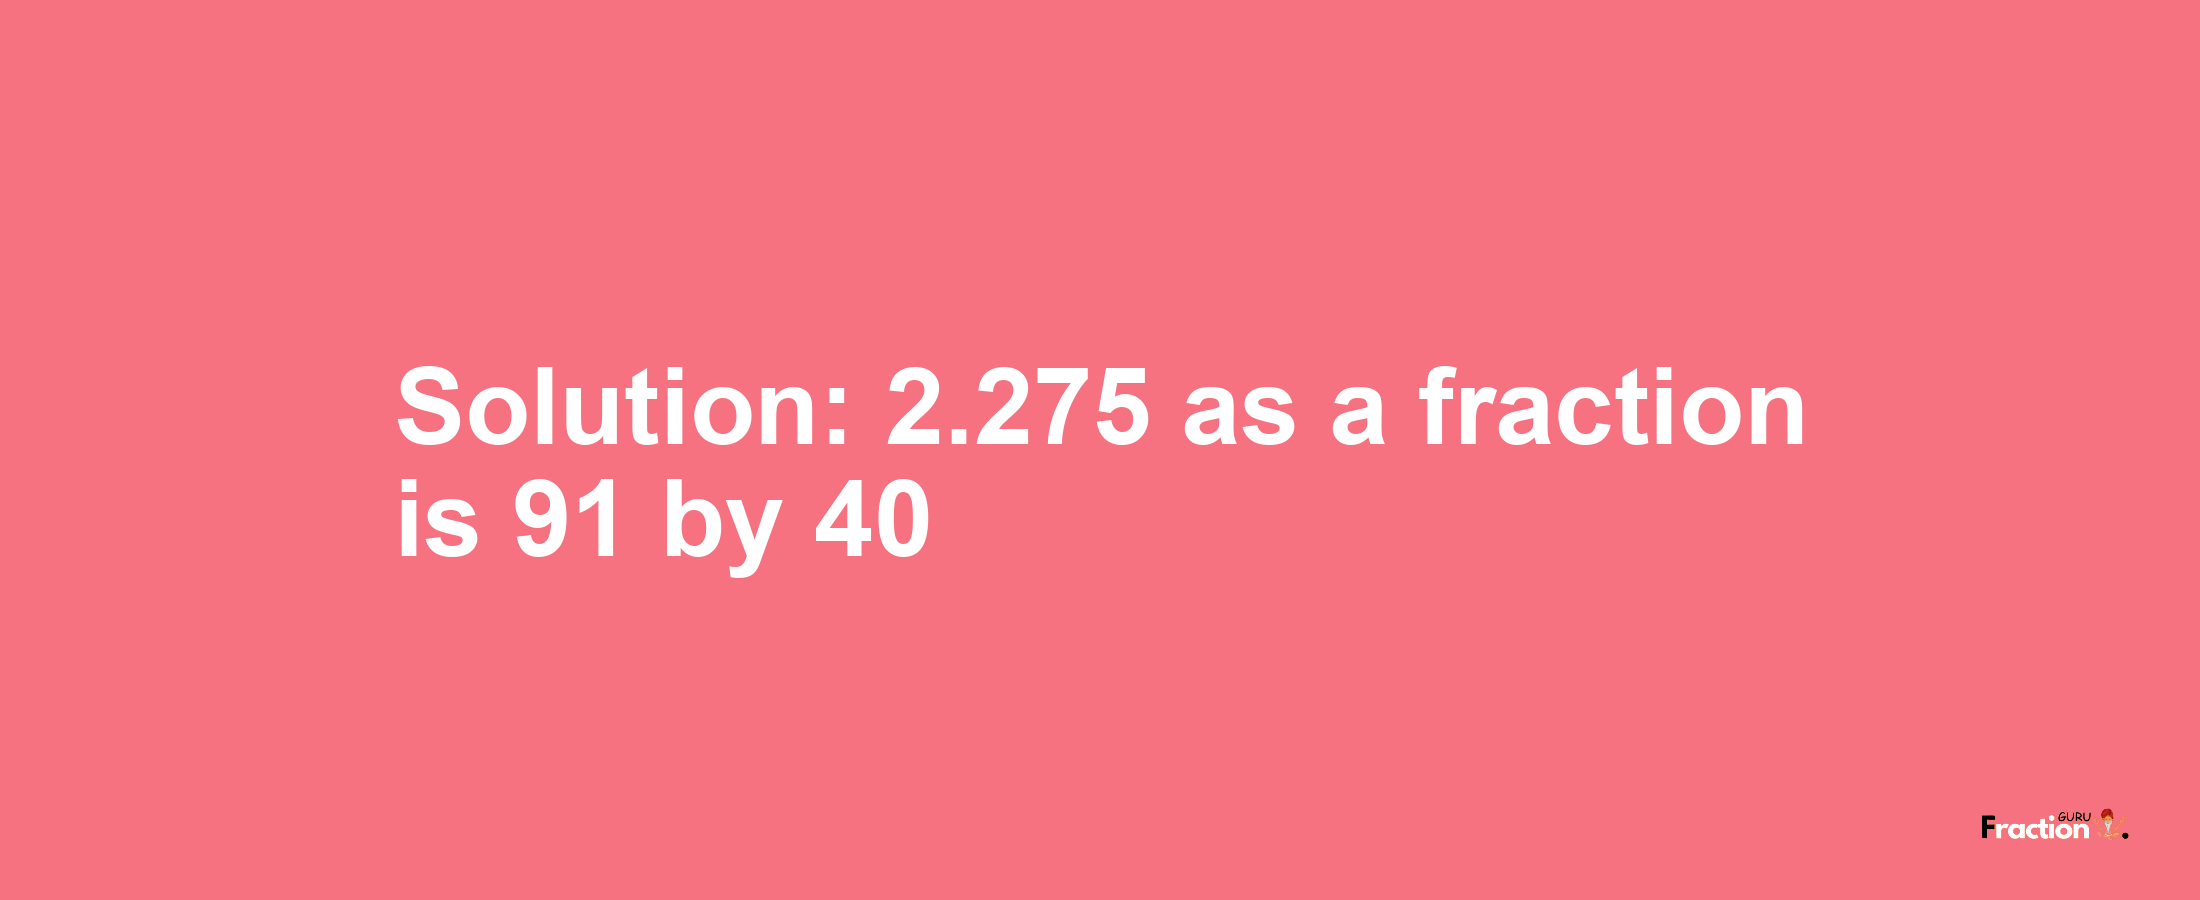 Solution:2.275 as a fraction is 91/40